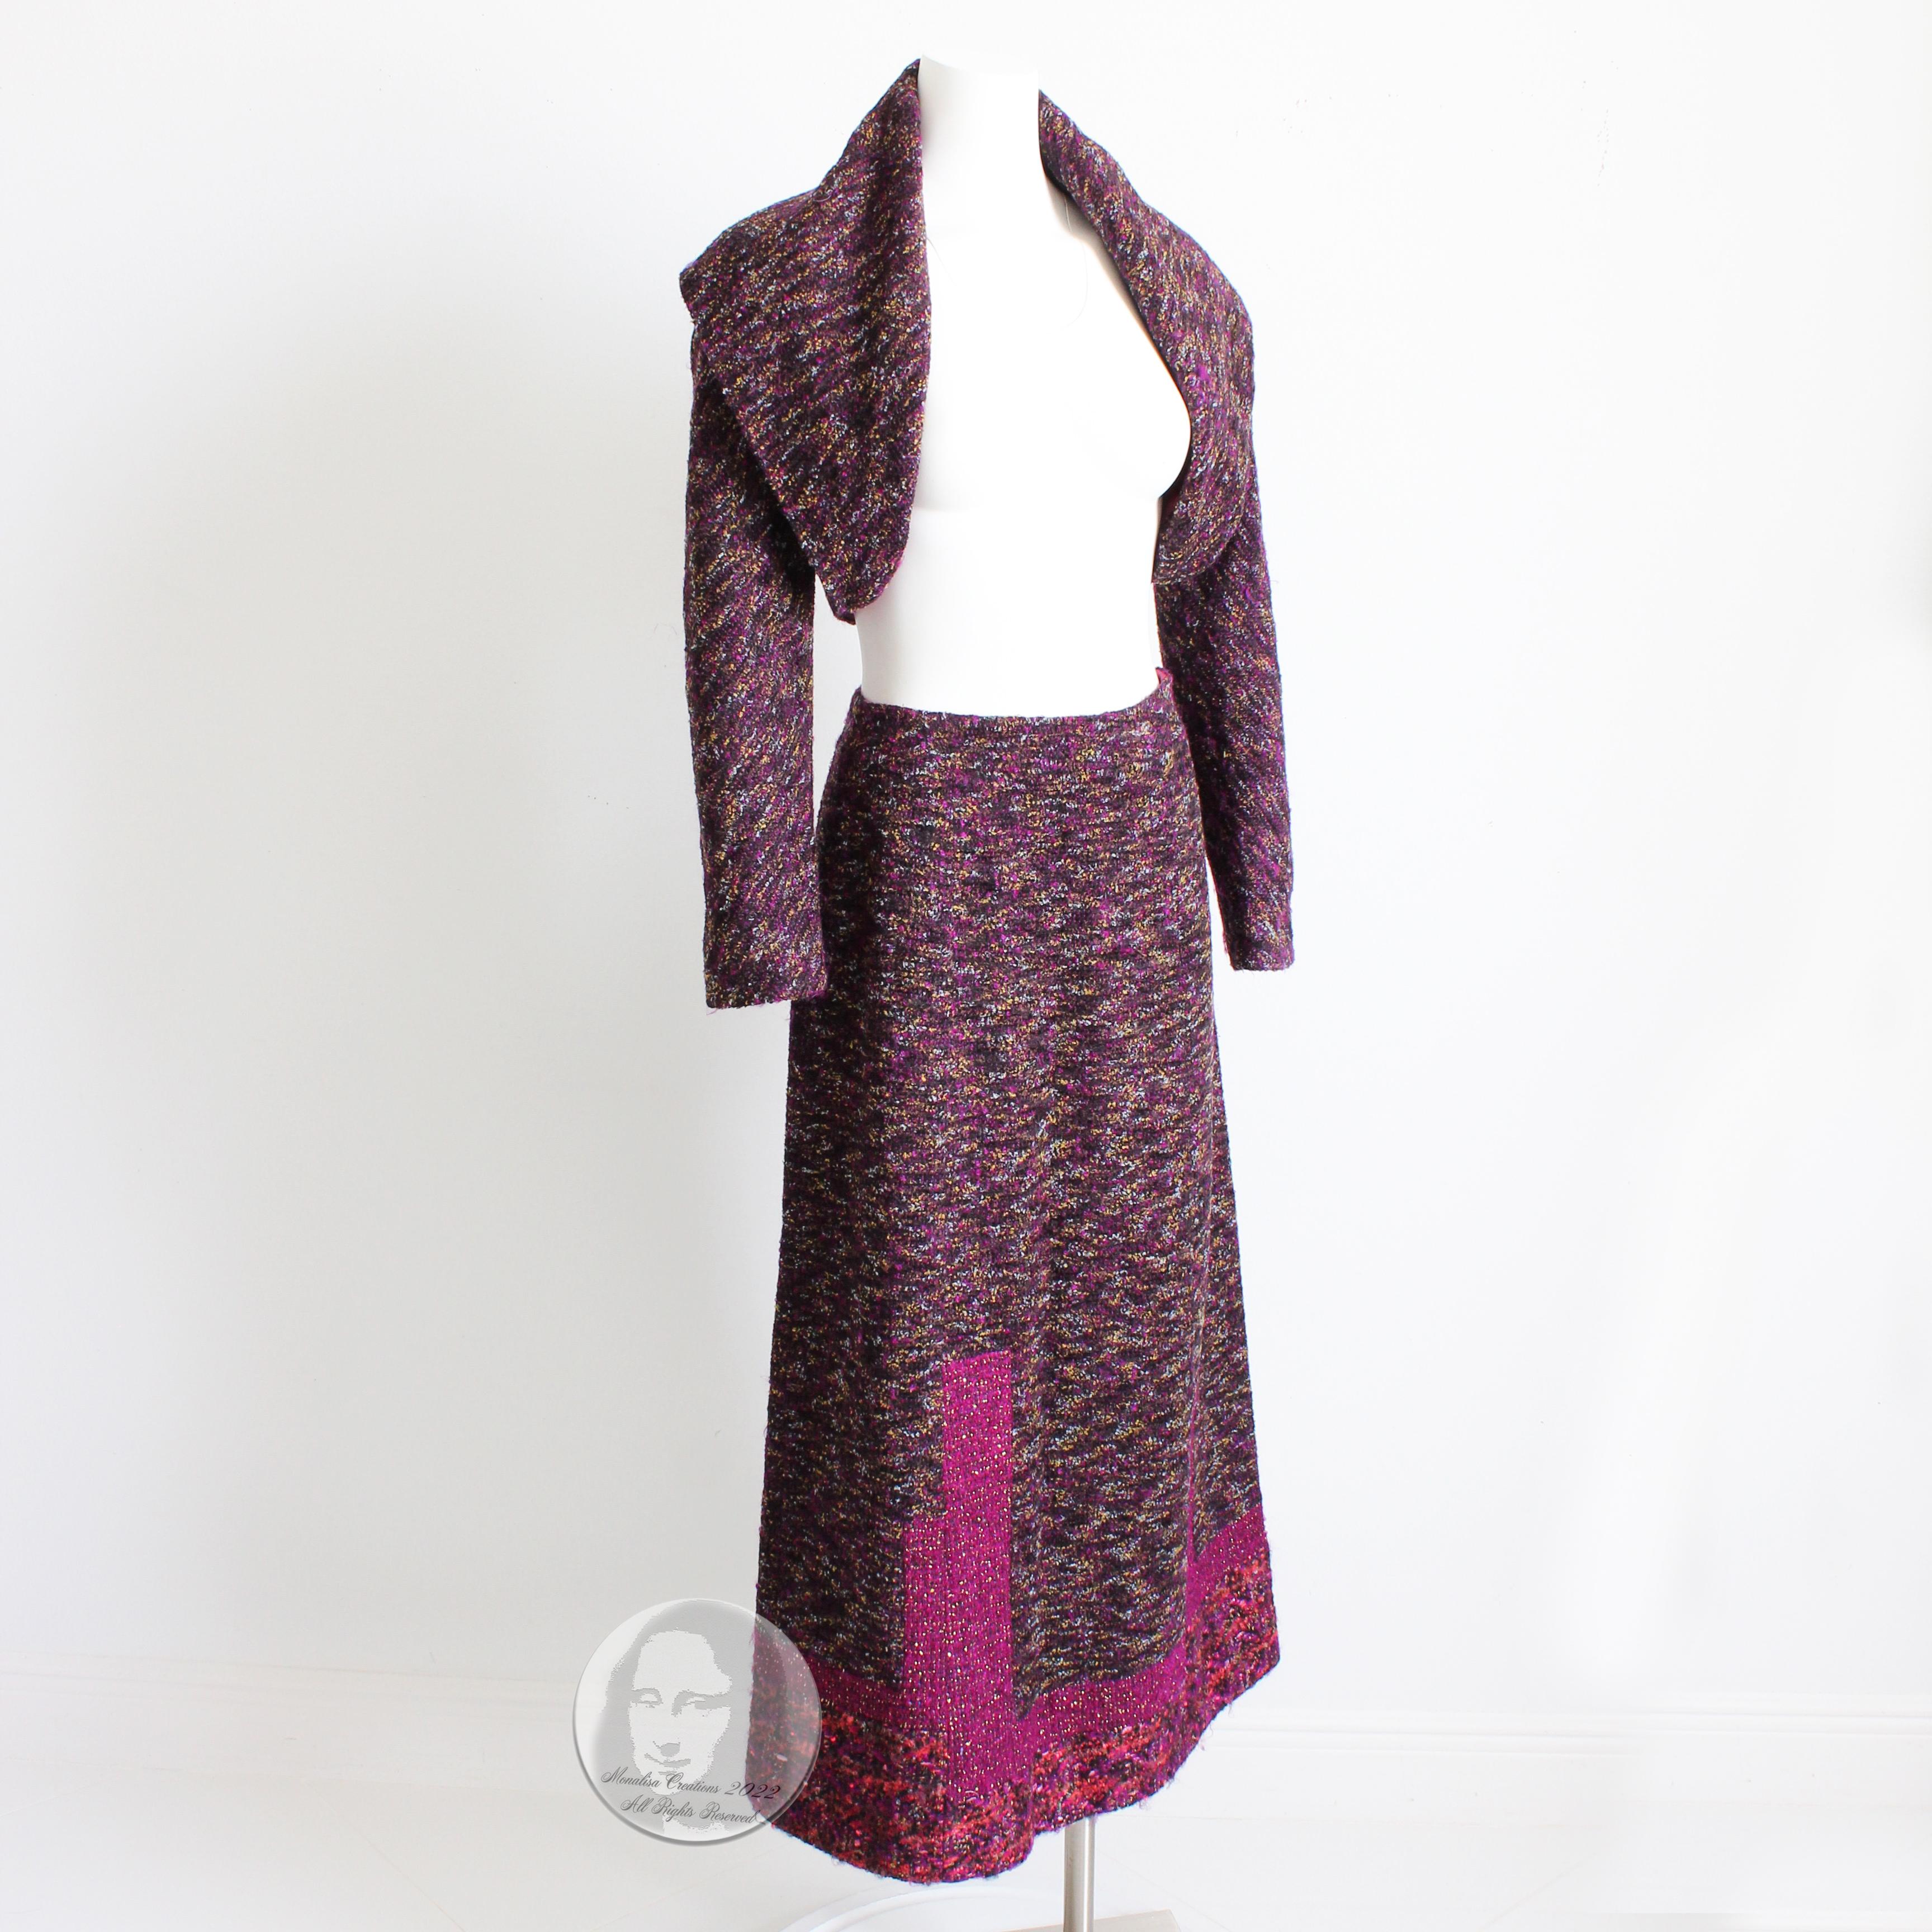 Preowned, vintage Kenzo Paris suit 2pc cropped shrug or jacket and maxi skirt, likely made in the late 90s.  Made from a gorgeous wool/mohair/synthetic blend knit in shades of lilac & fuchsia, the jacket is open and features a shawl collar; the